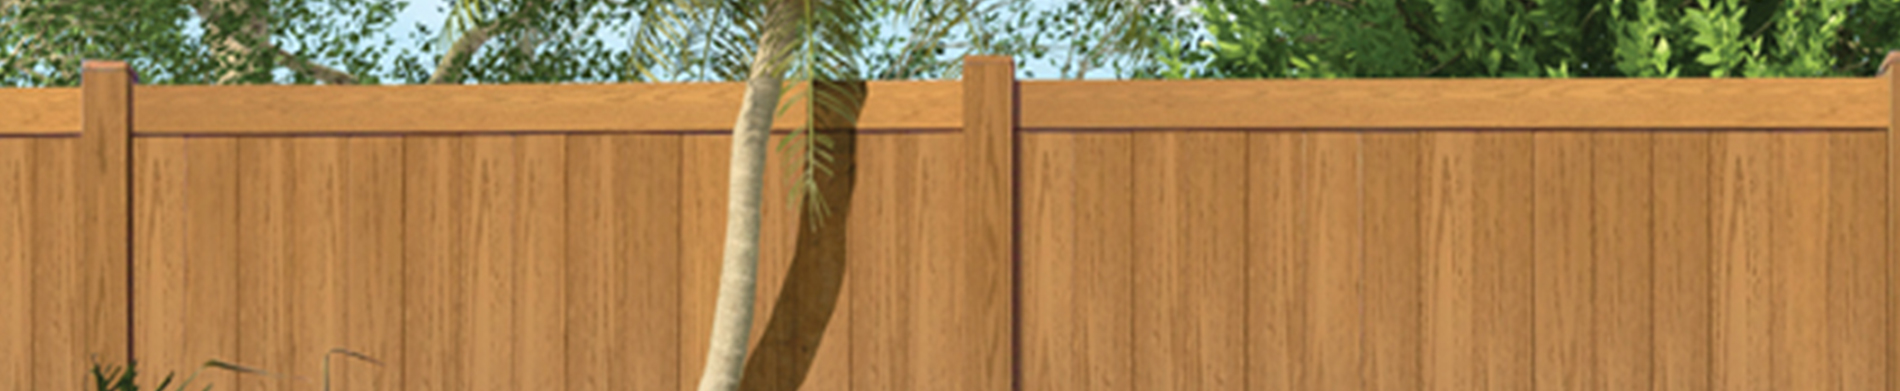 Install A Vinyl Fence And Give Your Home Exteriors An Aesthetic Look